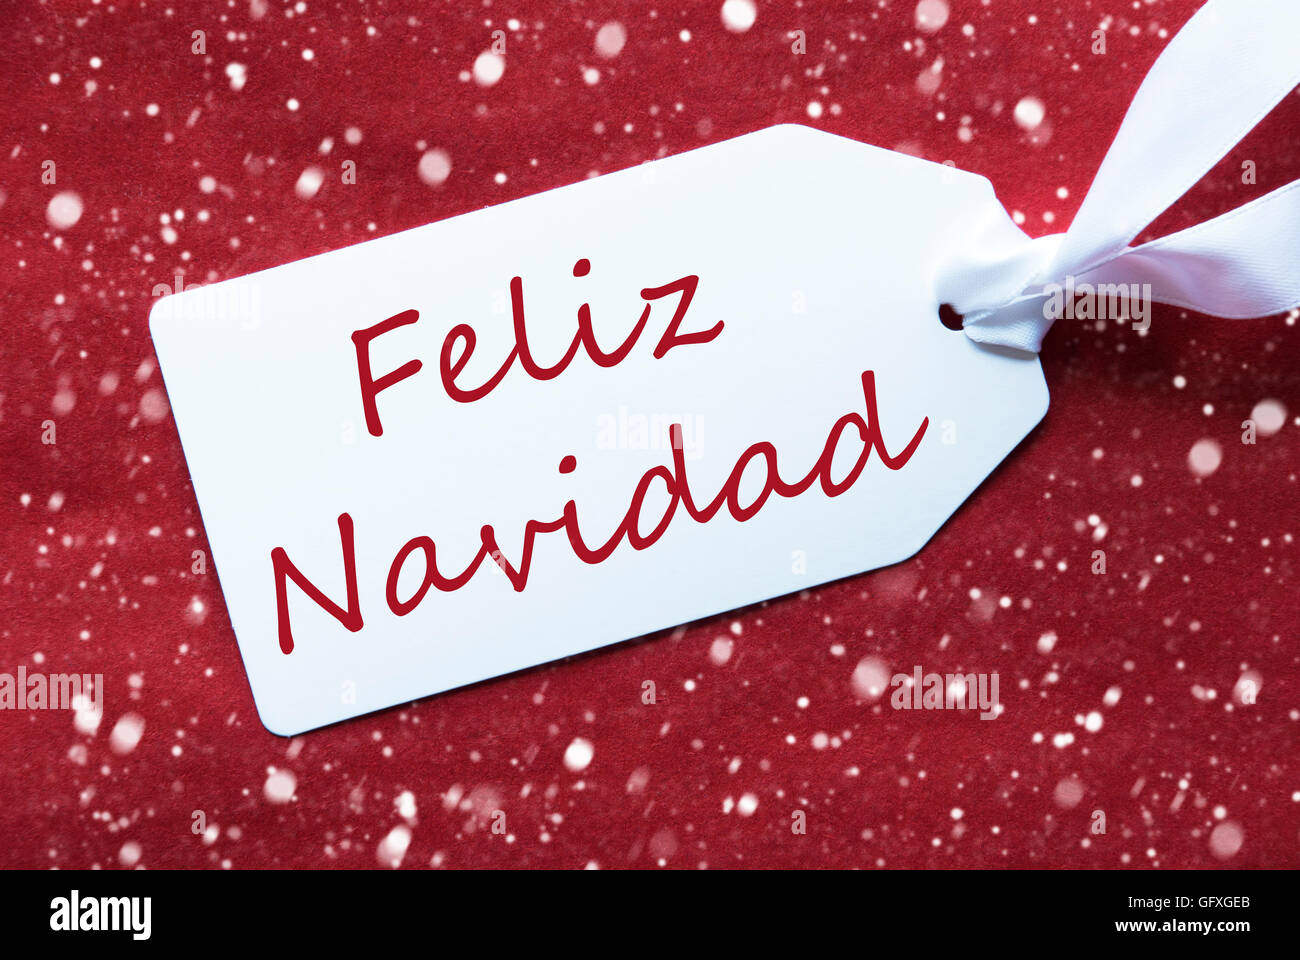 Label On Red Background, Snowflakes, Feliz Navidad Means Merry Christmas Stock Photo